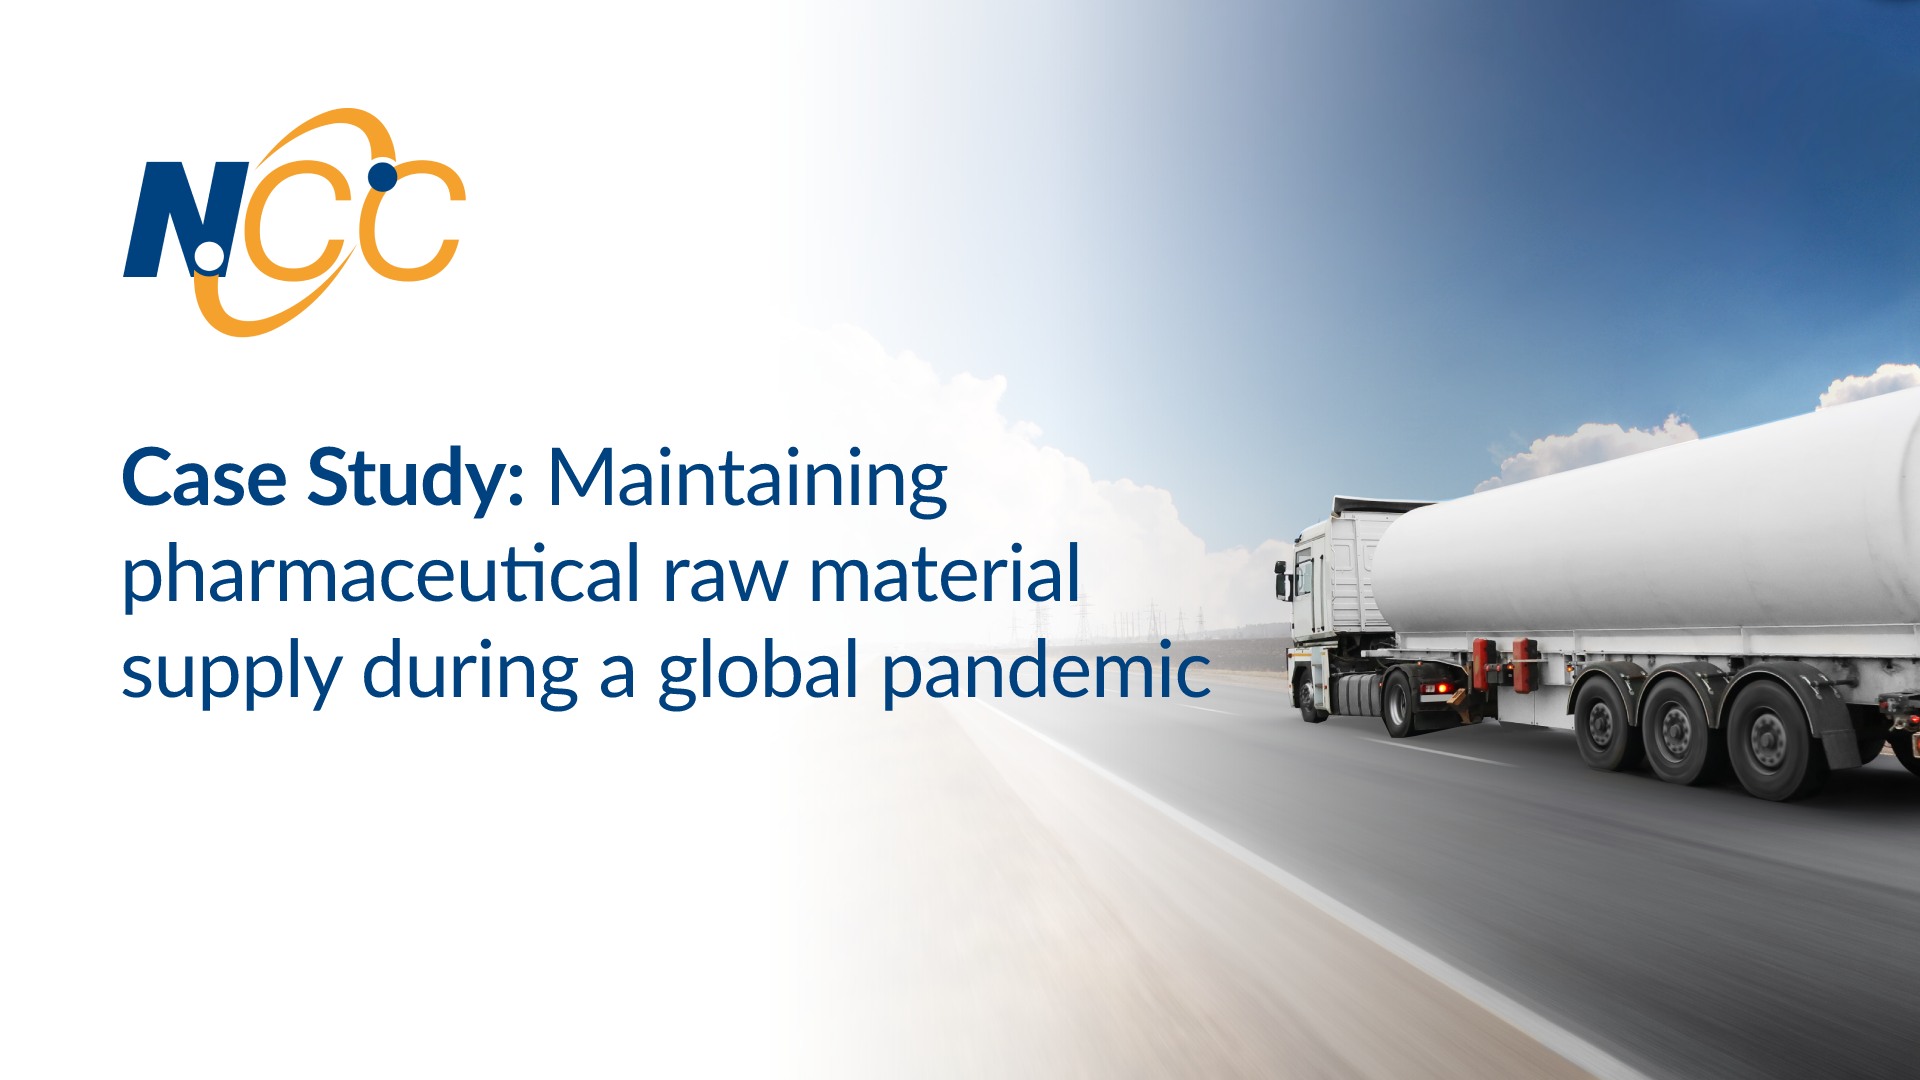 Maintaining pharmaceutical raw material supply during a global pandemic